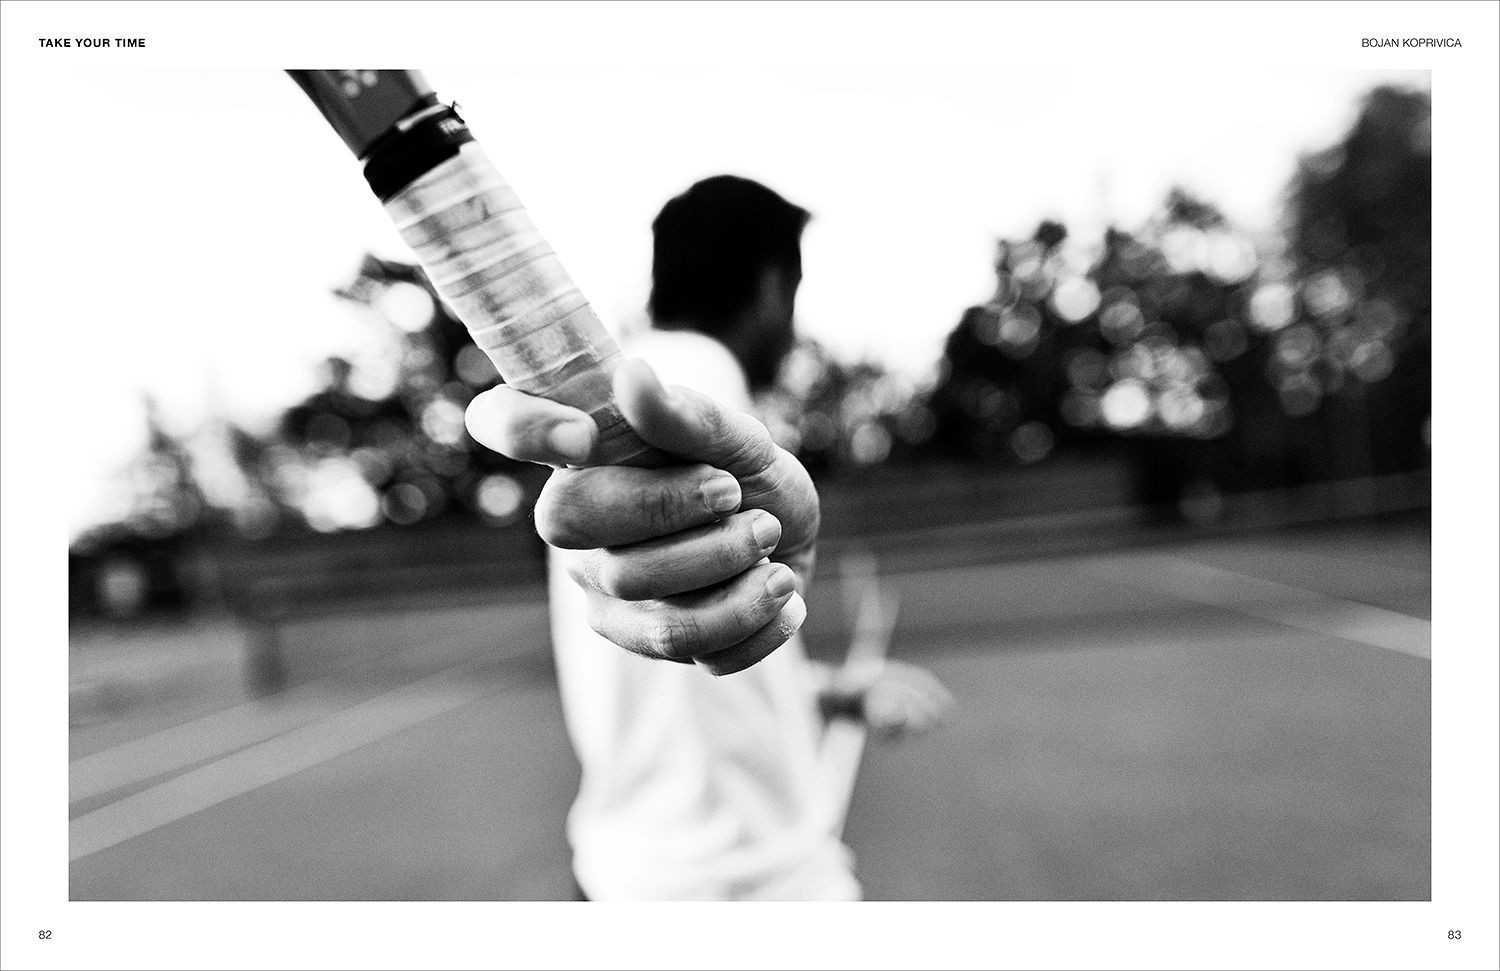 TAKE YOUR TIME Magazine pages: Bojan Koprivica playing tennis closeup of his hand by Cornelia Köster